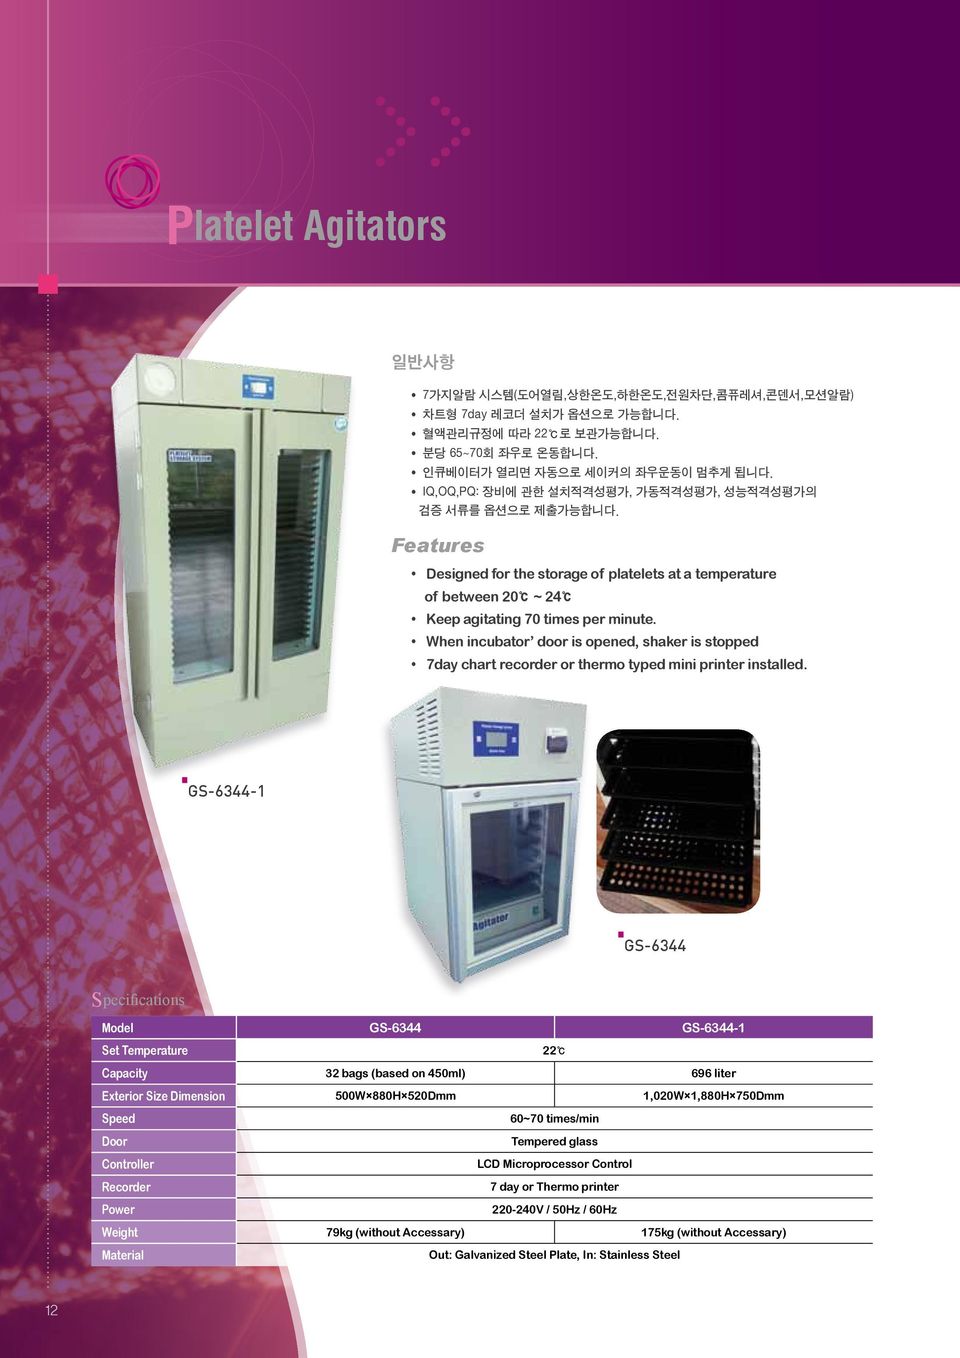 When incubator door is opened, shaker is stopped 7day chart recorder or thermo typed mini printer installed.